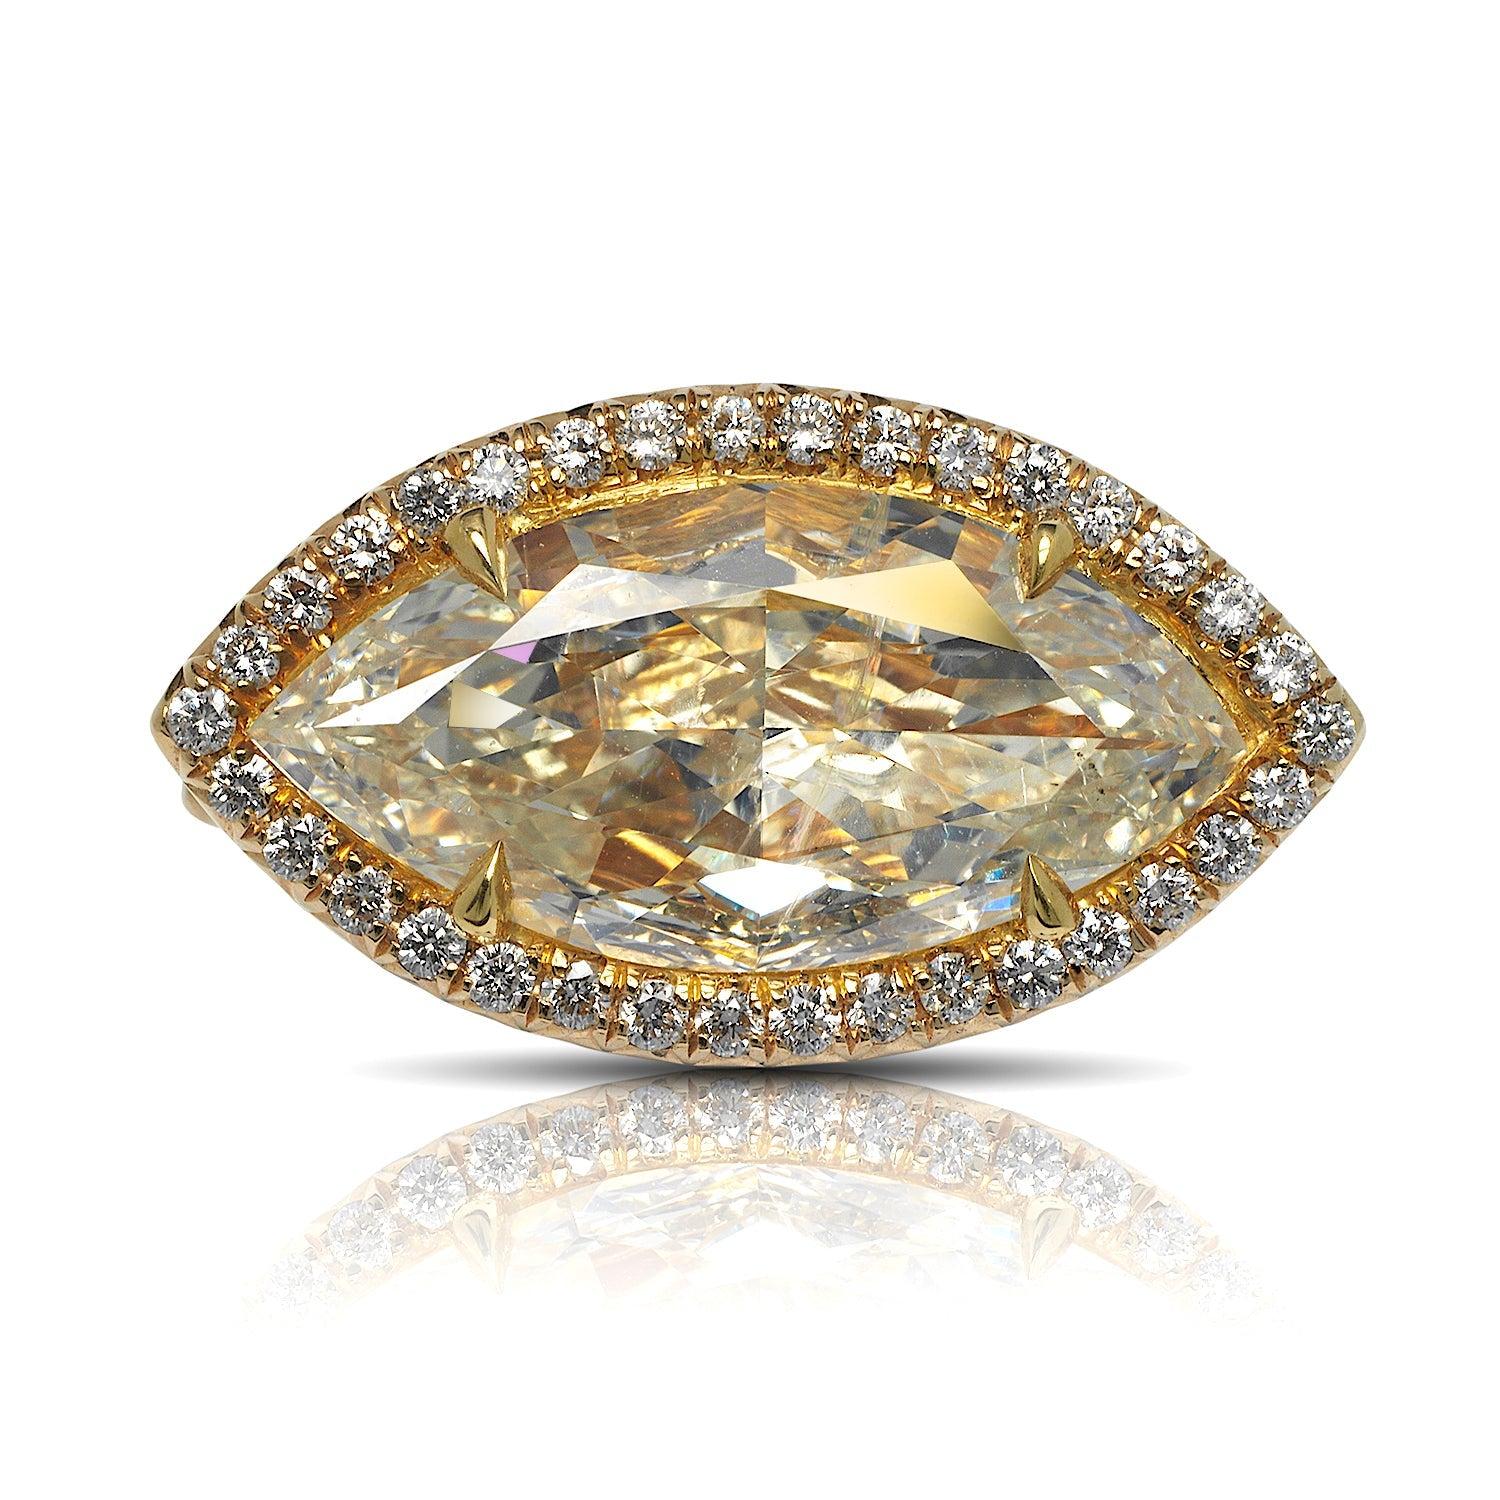 KATE  -4 CT HALO MARQUISE DIAMOND ENGAGEMENT RING BY MIKE NEKTA

GIA CERTIFIED

Center Diamond
Carat Weight: 3 Carats
Color:   Light Yellow
Clarity:  SI1
Cut: MARQUISE BRILLIANT
Measurements:  14.9 x 7.3 x 4.6 mm

 
Ring:
Metal: 18K YELLOW